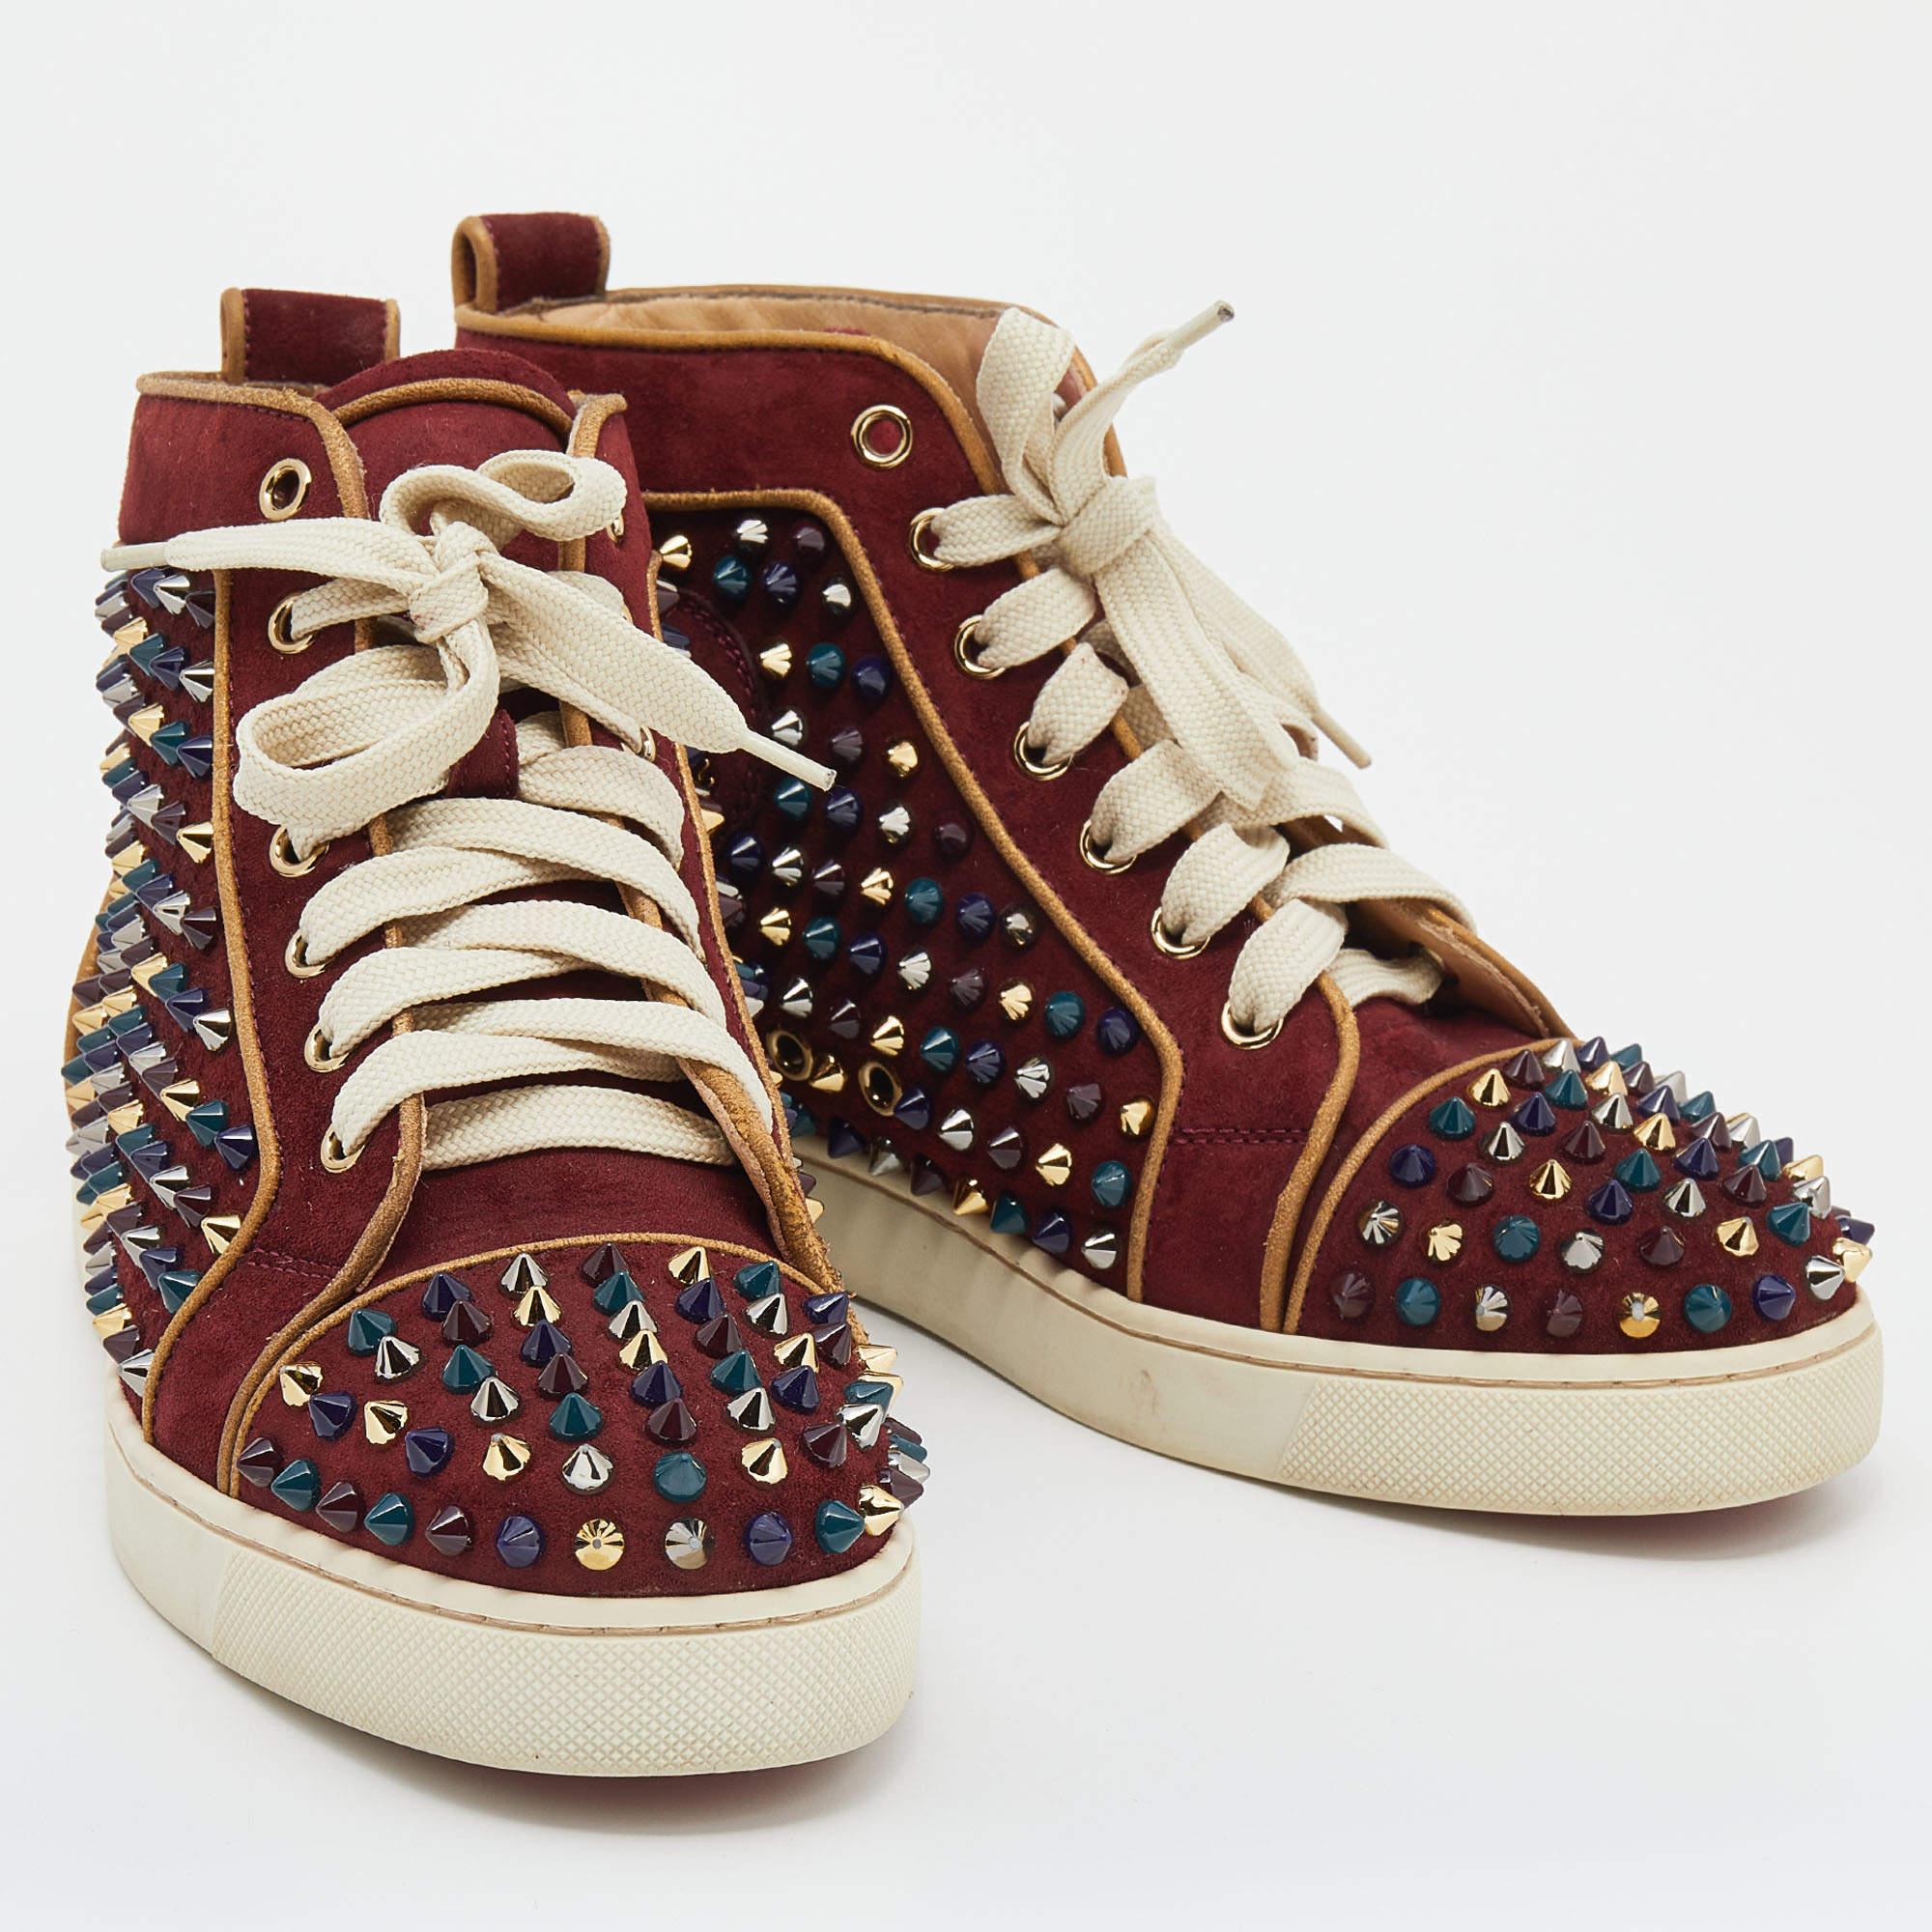 Christian Louboutin Burgundy Suede Louis Spikes High Top Sneakers Size 37.5 In Good Condition For Sale In Dubai, Al Qouz 2